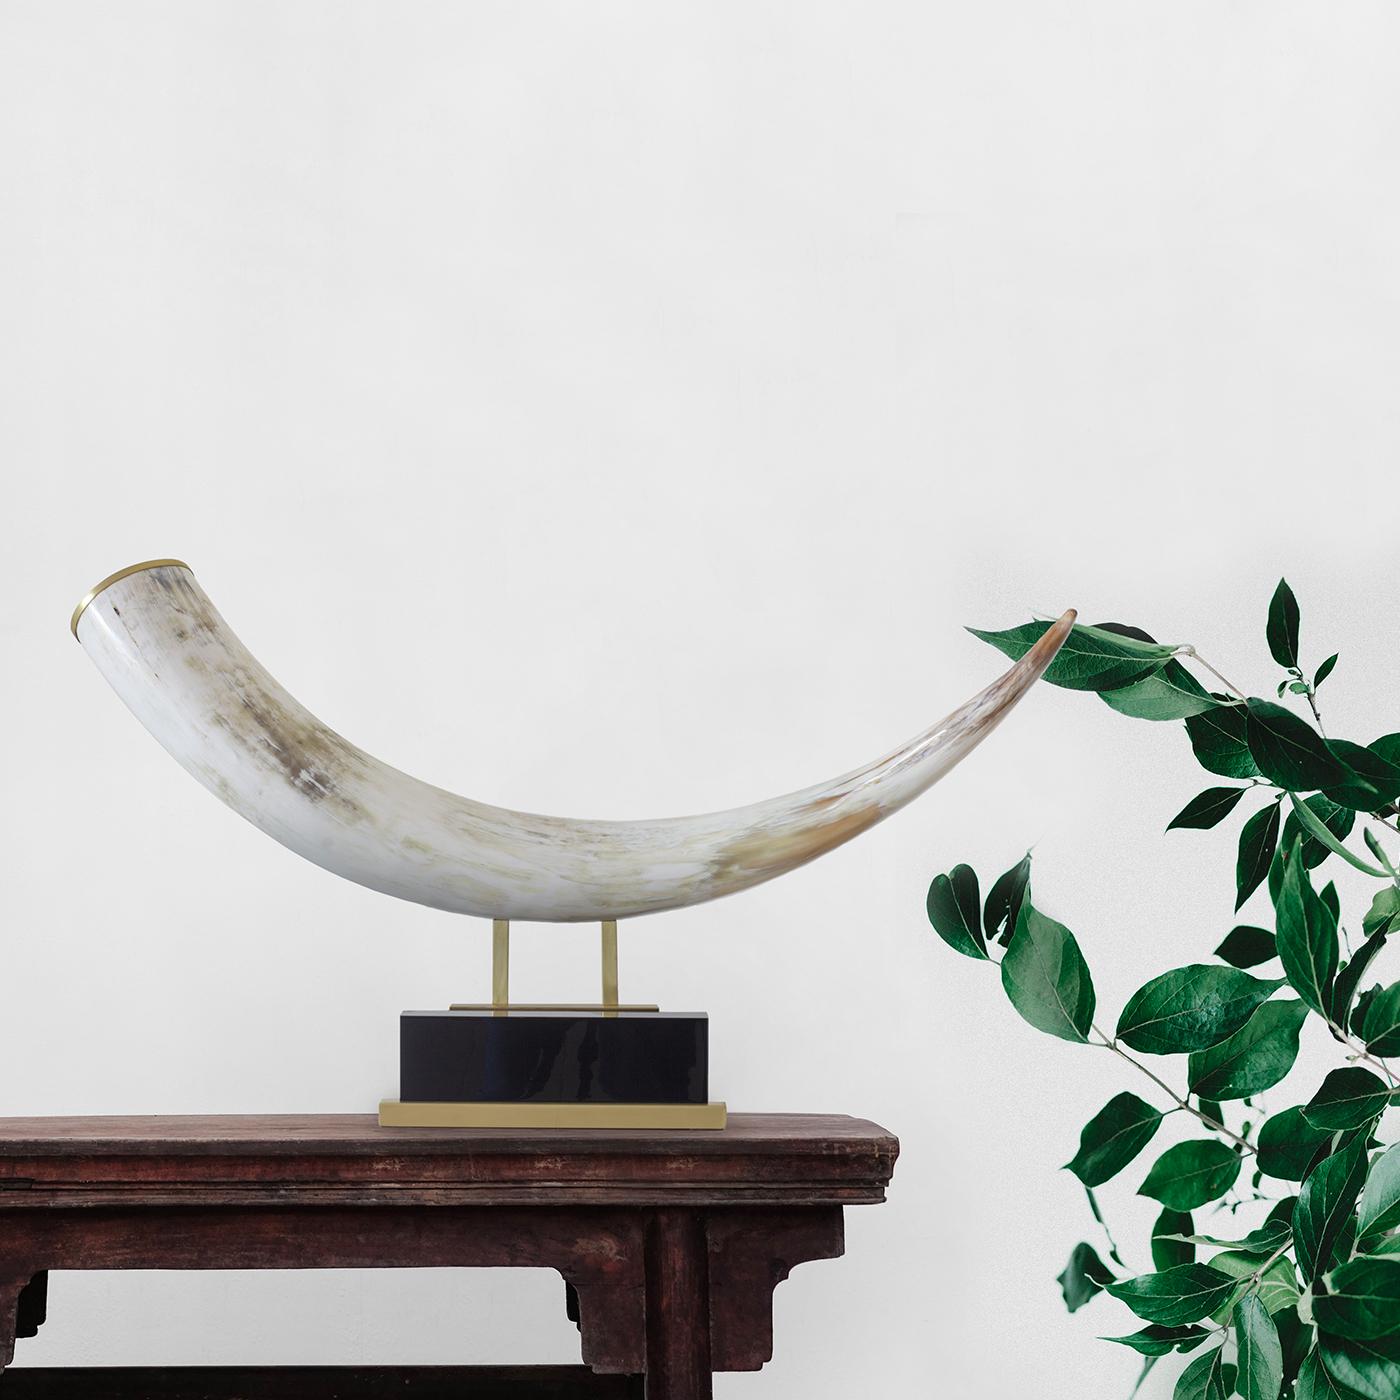 A standalone statement piece that will set the style in any home, this stunning horn sculpture can be displayed on a console in the living room or stately foyer in a traditional and modern interior decor. The support is made of black resin and